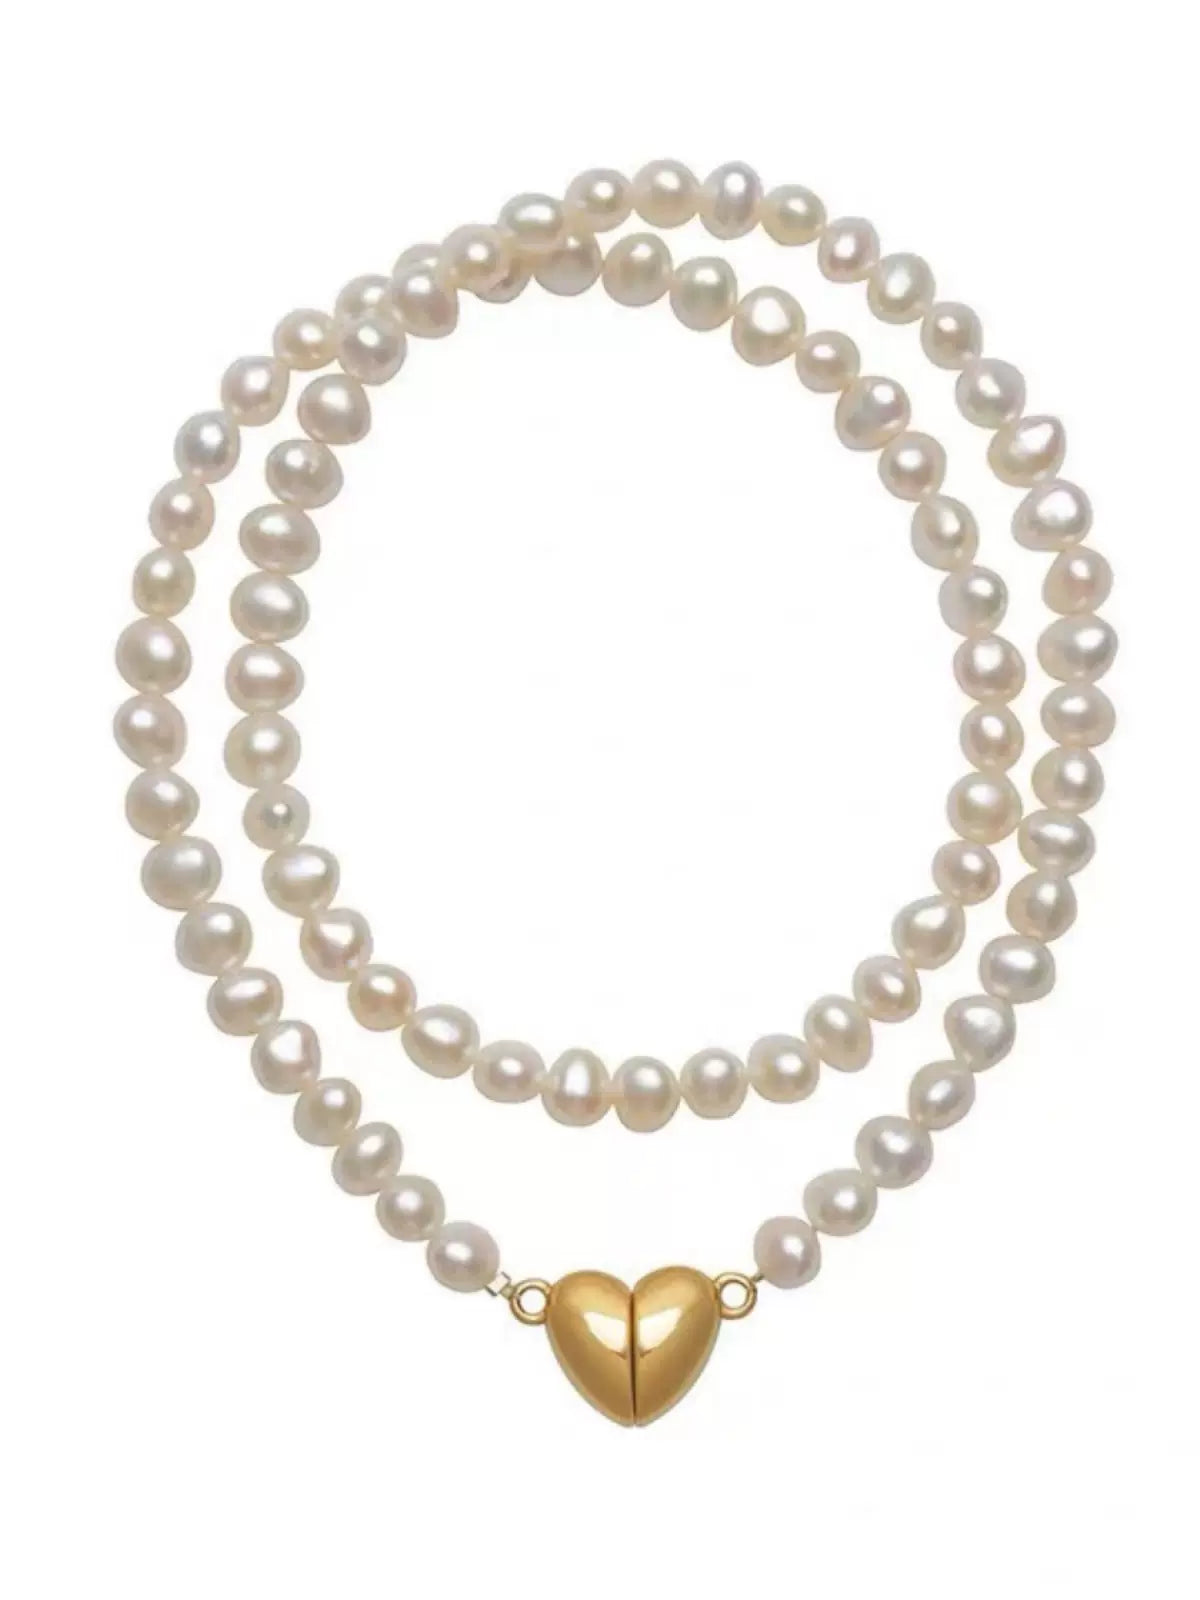 Heart Mother's Style Premium Pearl Choker Necklace ハート パール 真珠 ネックレス チョーカー